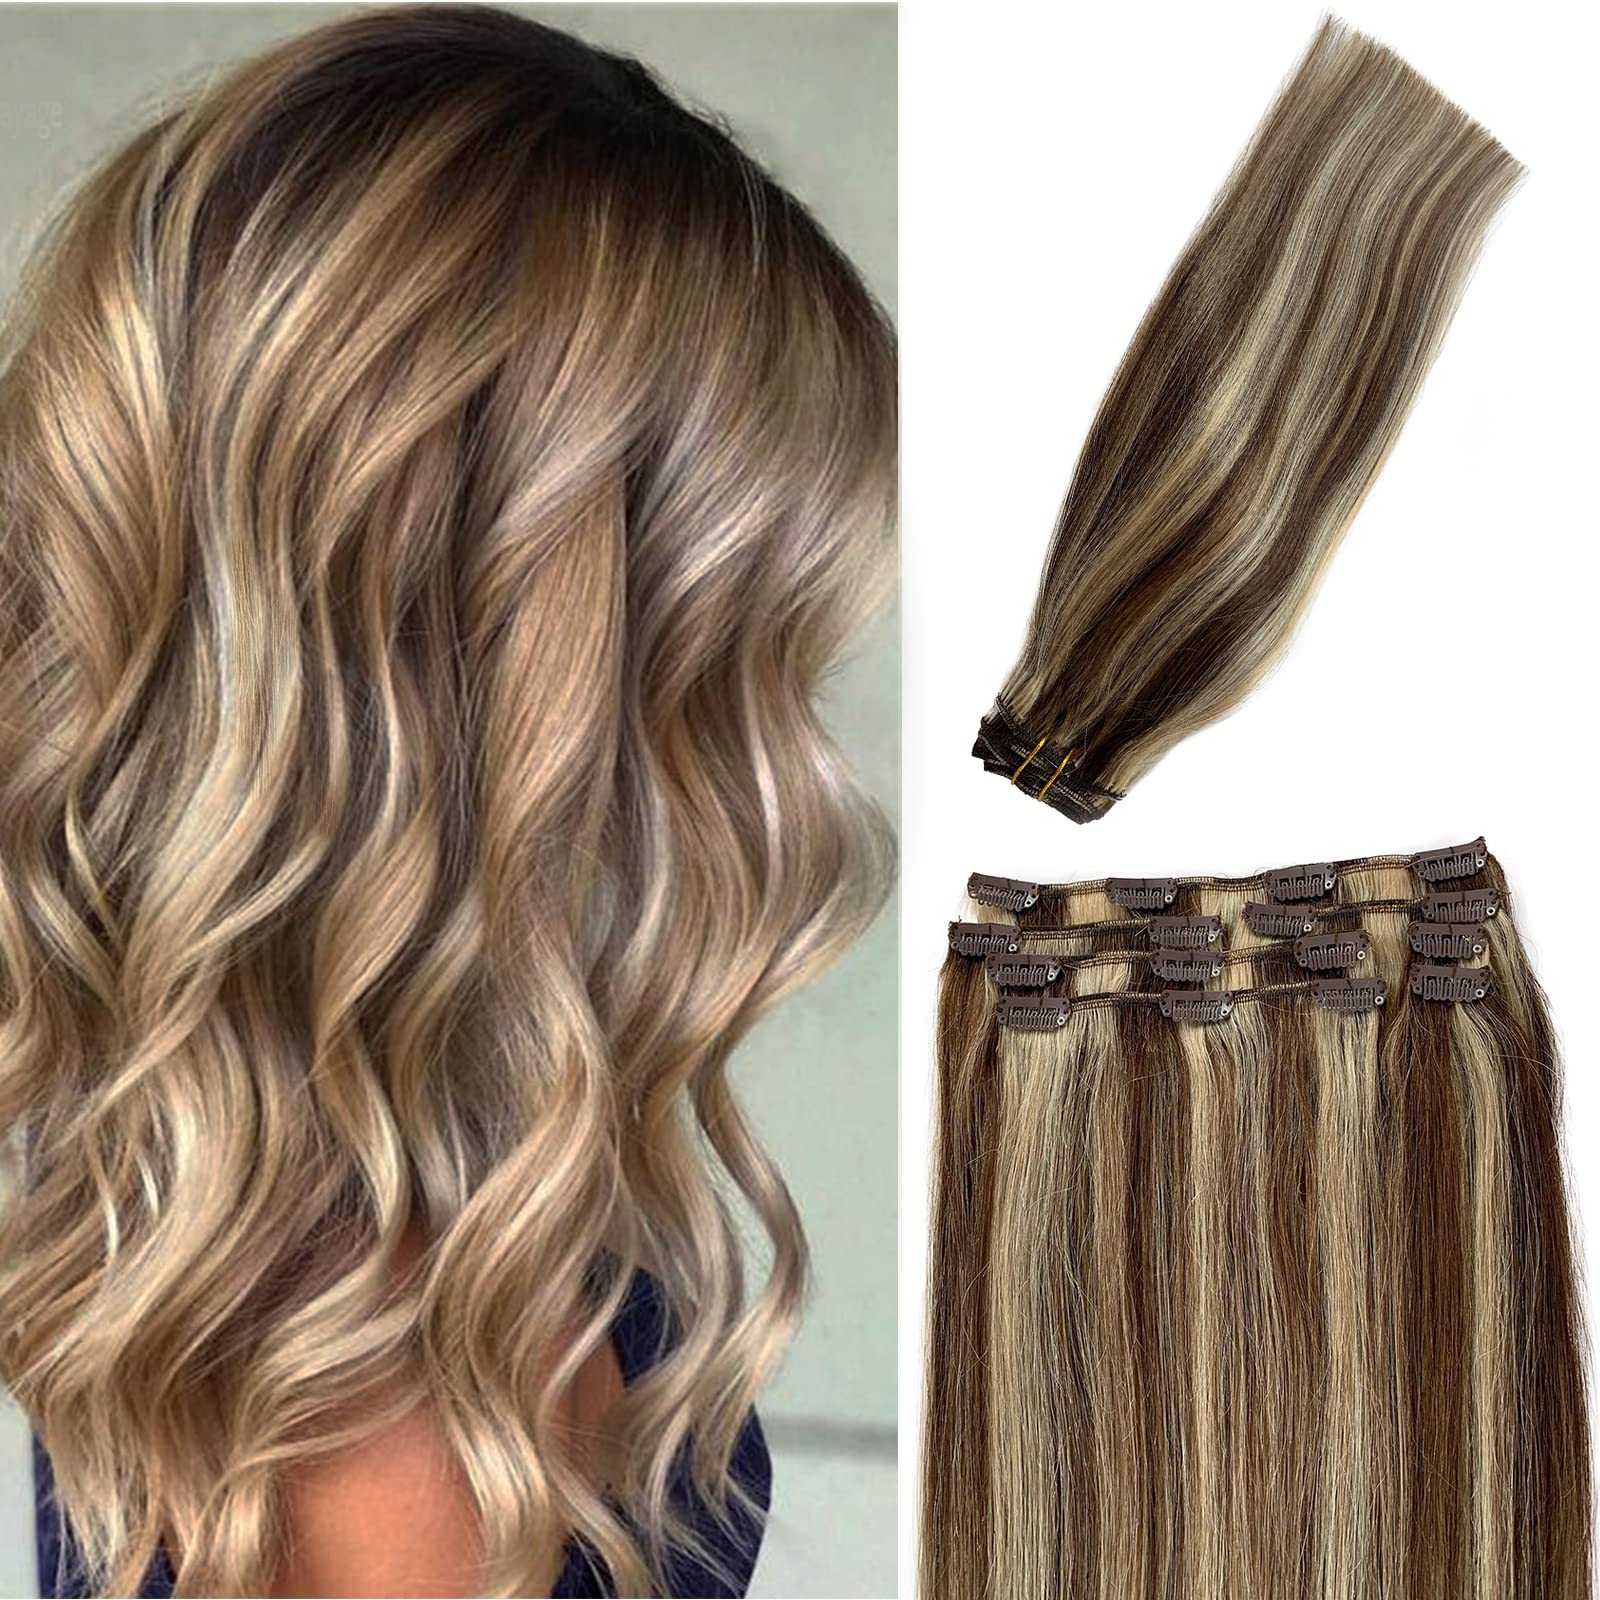 Remy Clip in Hair Extensions Blonde with Brown Balayage Clip ins Extensions  Human Hair Silky Straight 15 Inch Short Clip on Extension Blonde Highlights  on Brown Hair 70Gram(#4/613) 15 Inch #04P613 Brown